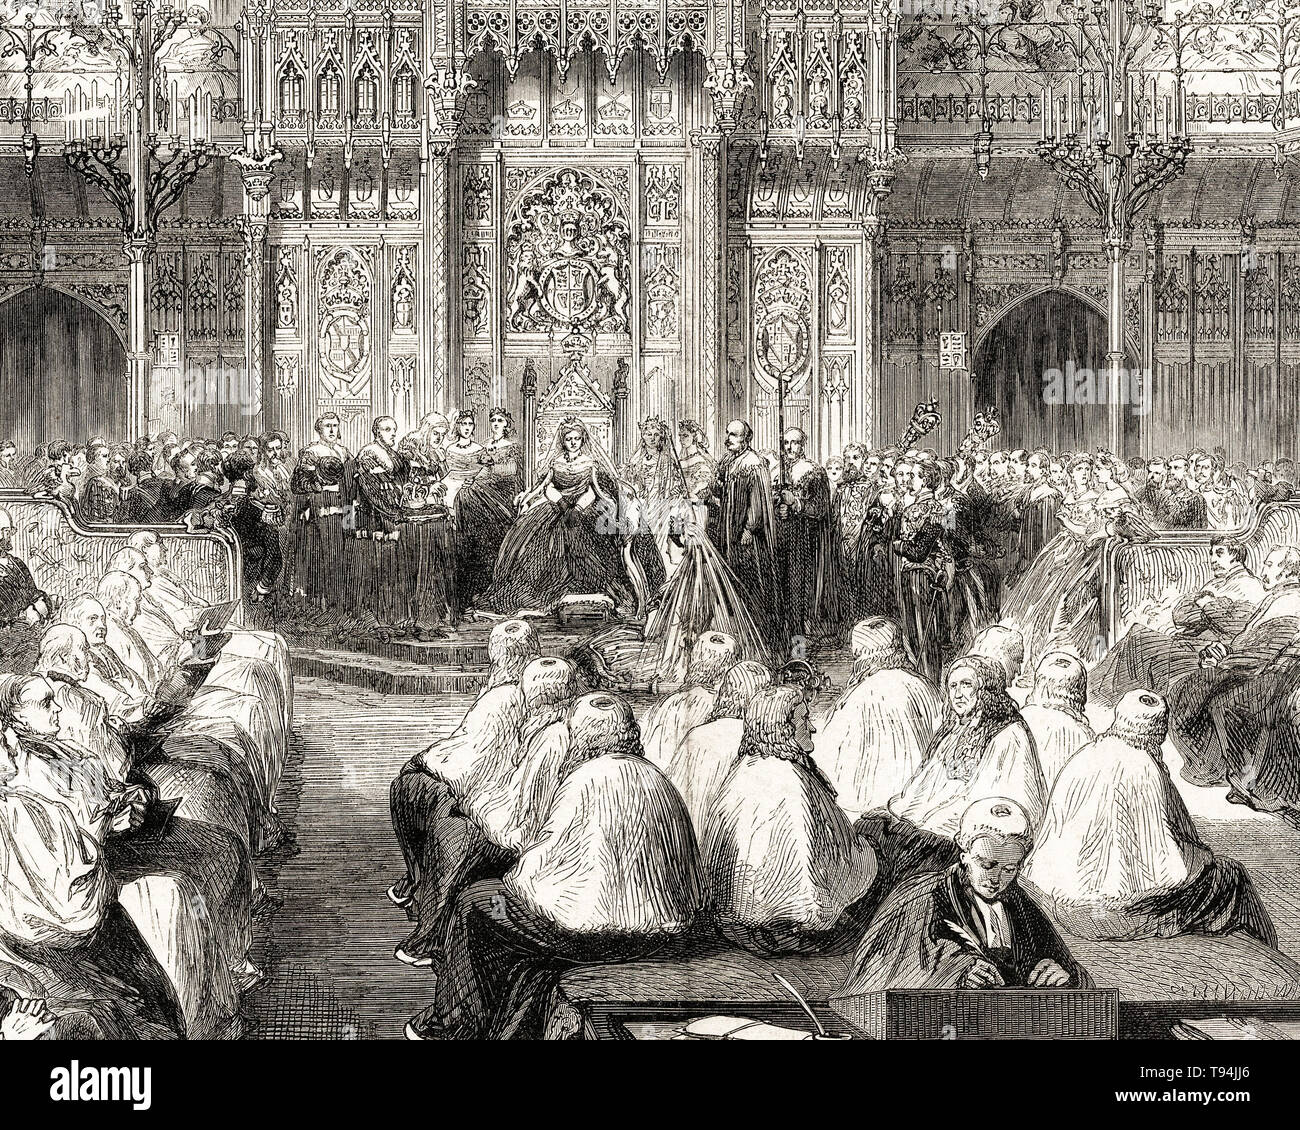 Queen Victoria, State Opening of Parliament, House of Lords, Tuesday, Feb. 6, 1866 (detail), engraving by Mason Jackson, 1866 Stock Photo